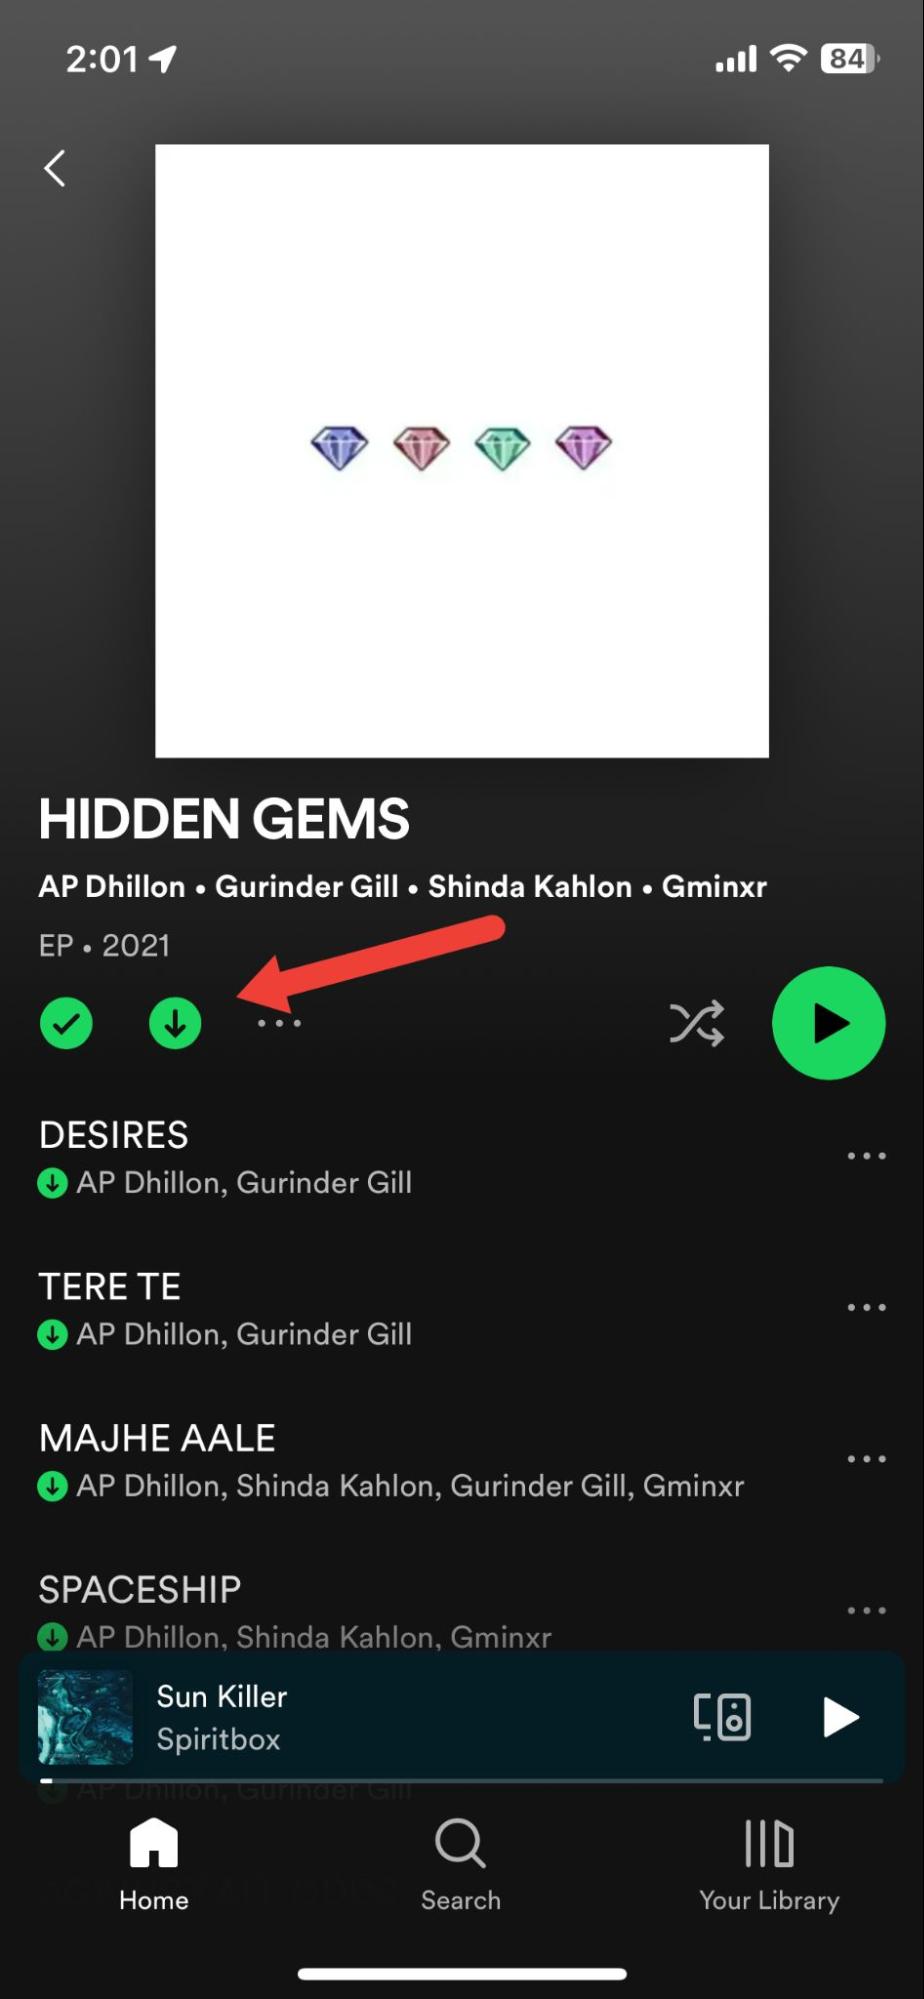 Solved: Download Entire Album from Spotify All at Once